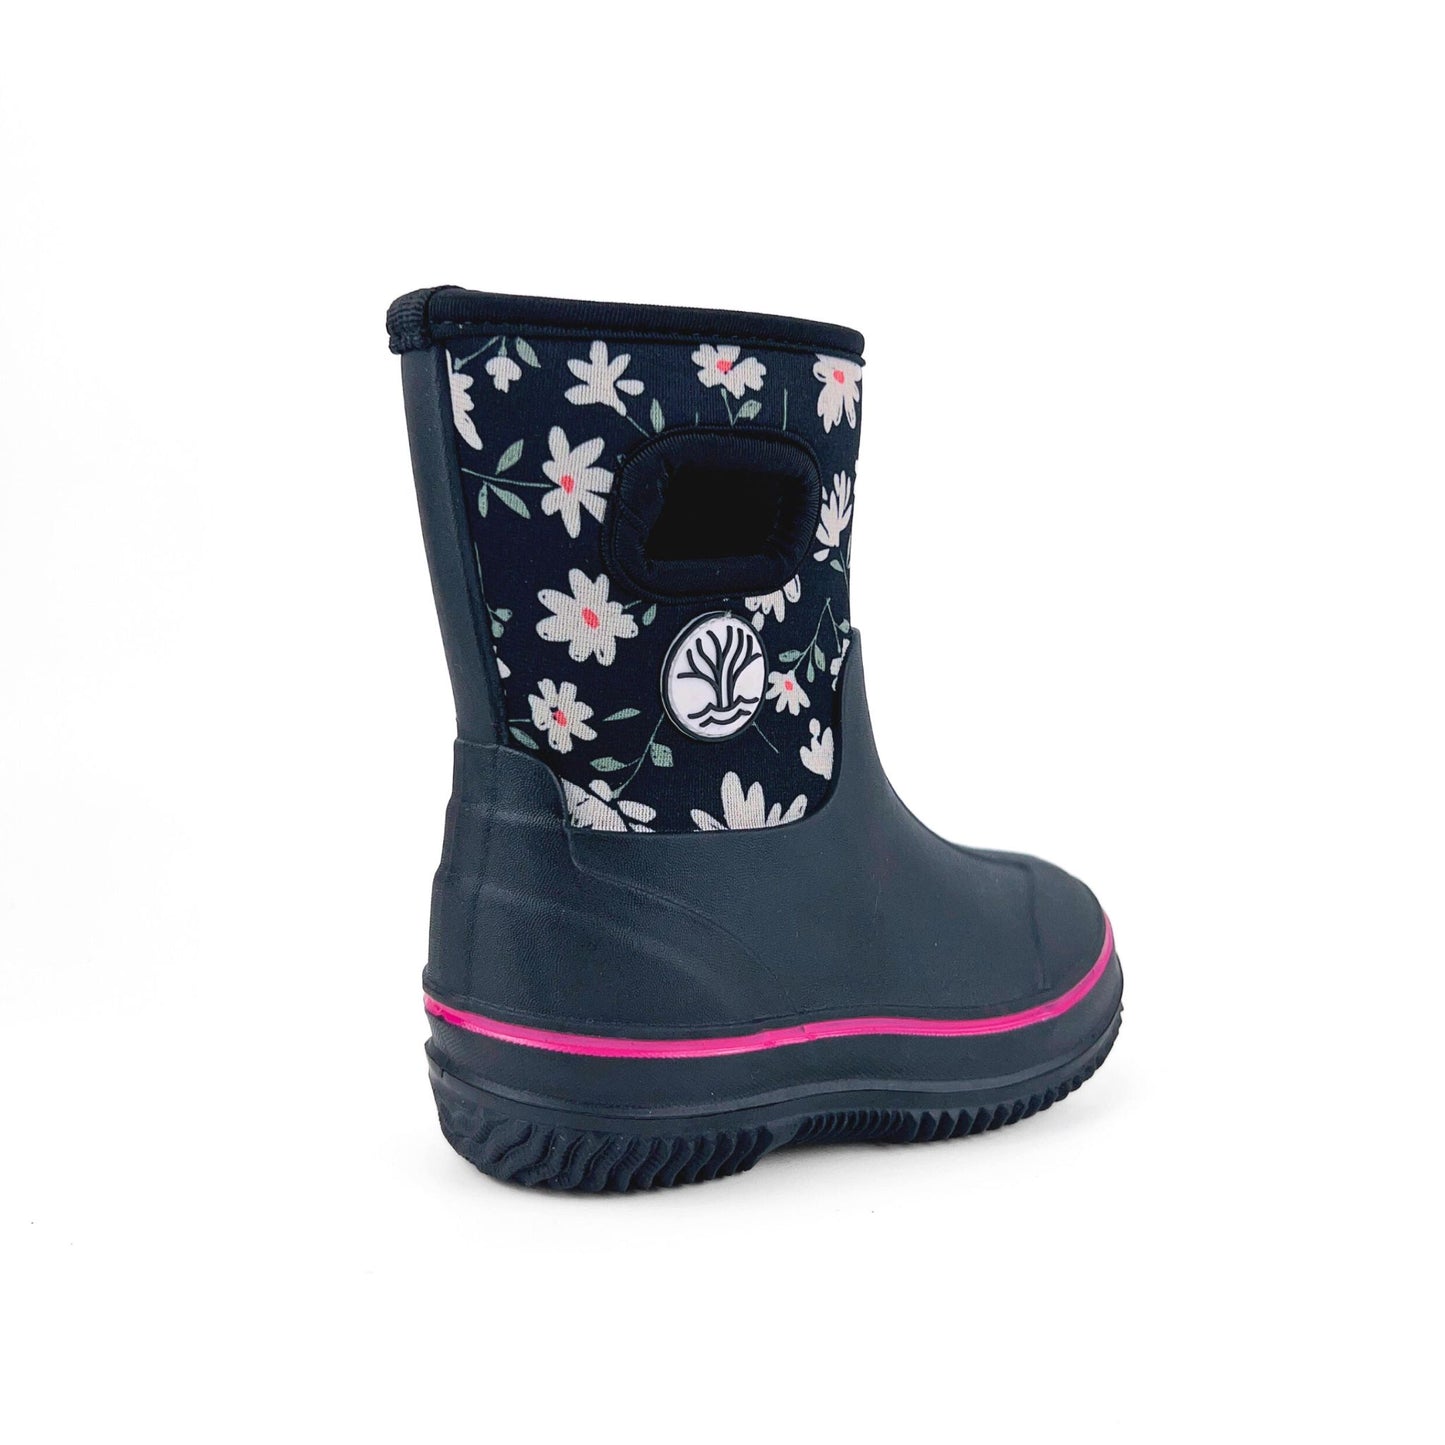 Gumboot made of neoprene with daisy design and pink highlight. Waterproof rain boots.